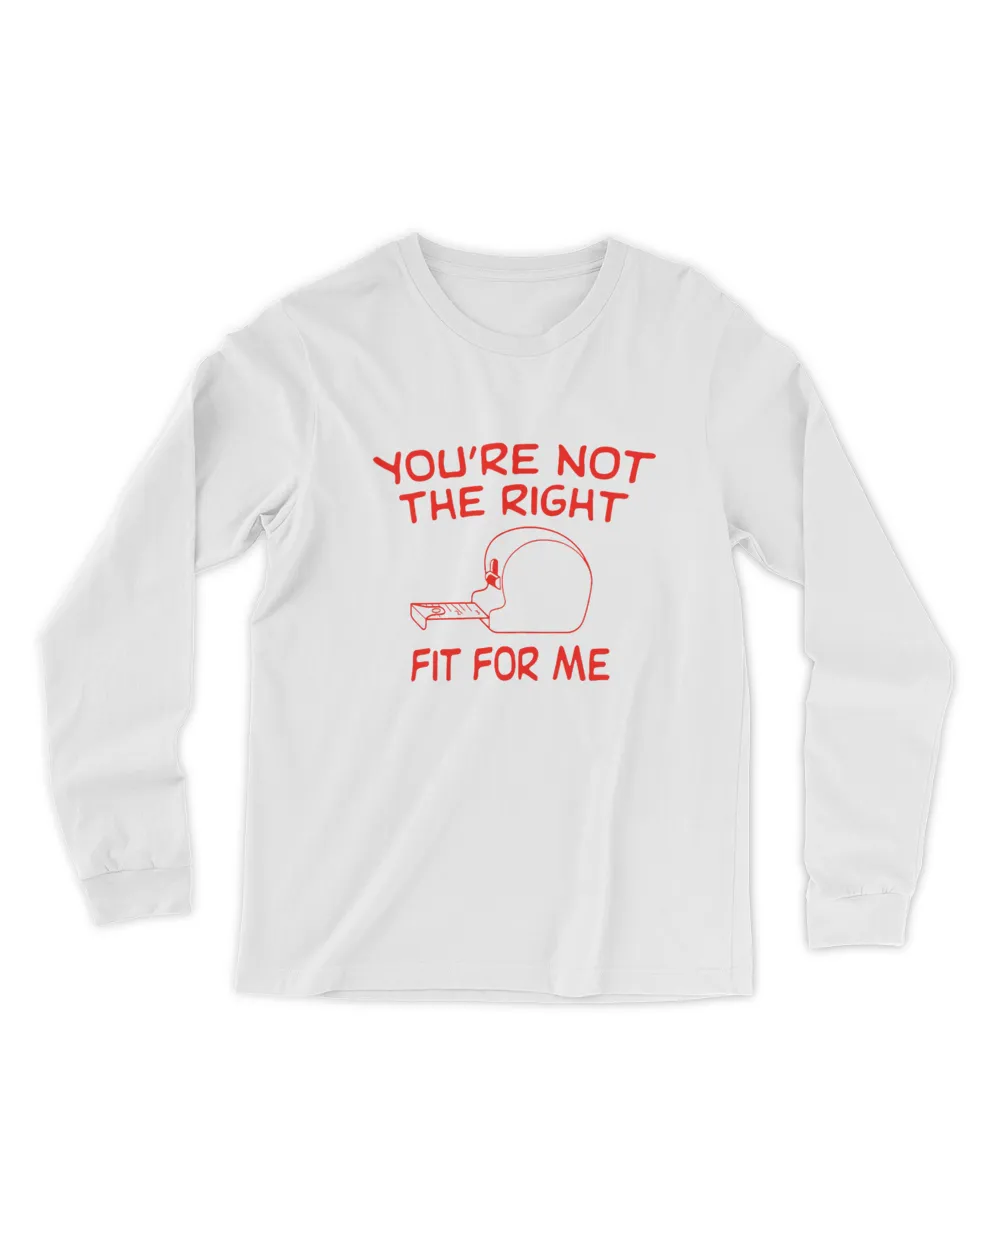 You're Not The Right Fit For Me Tee Shirt Men's Long Sleeved T-Shirt white 